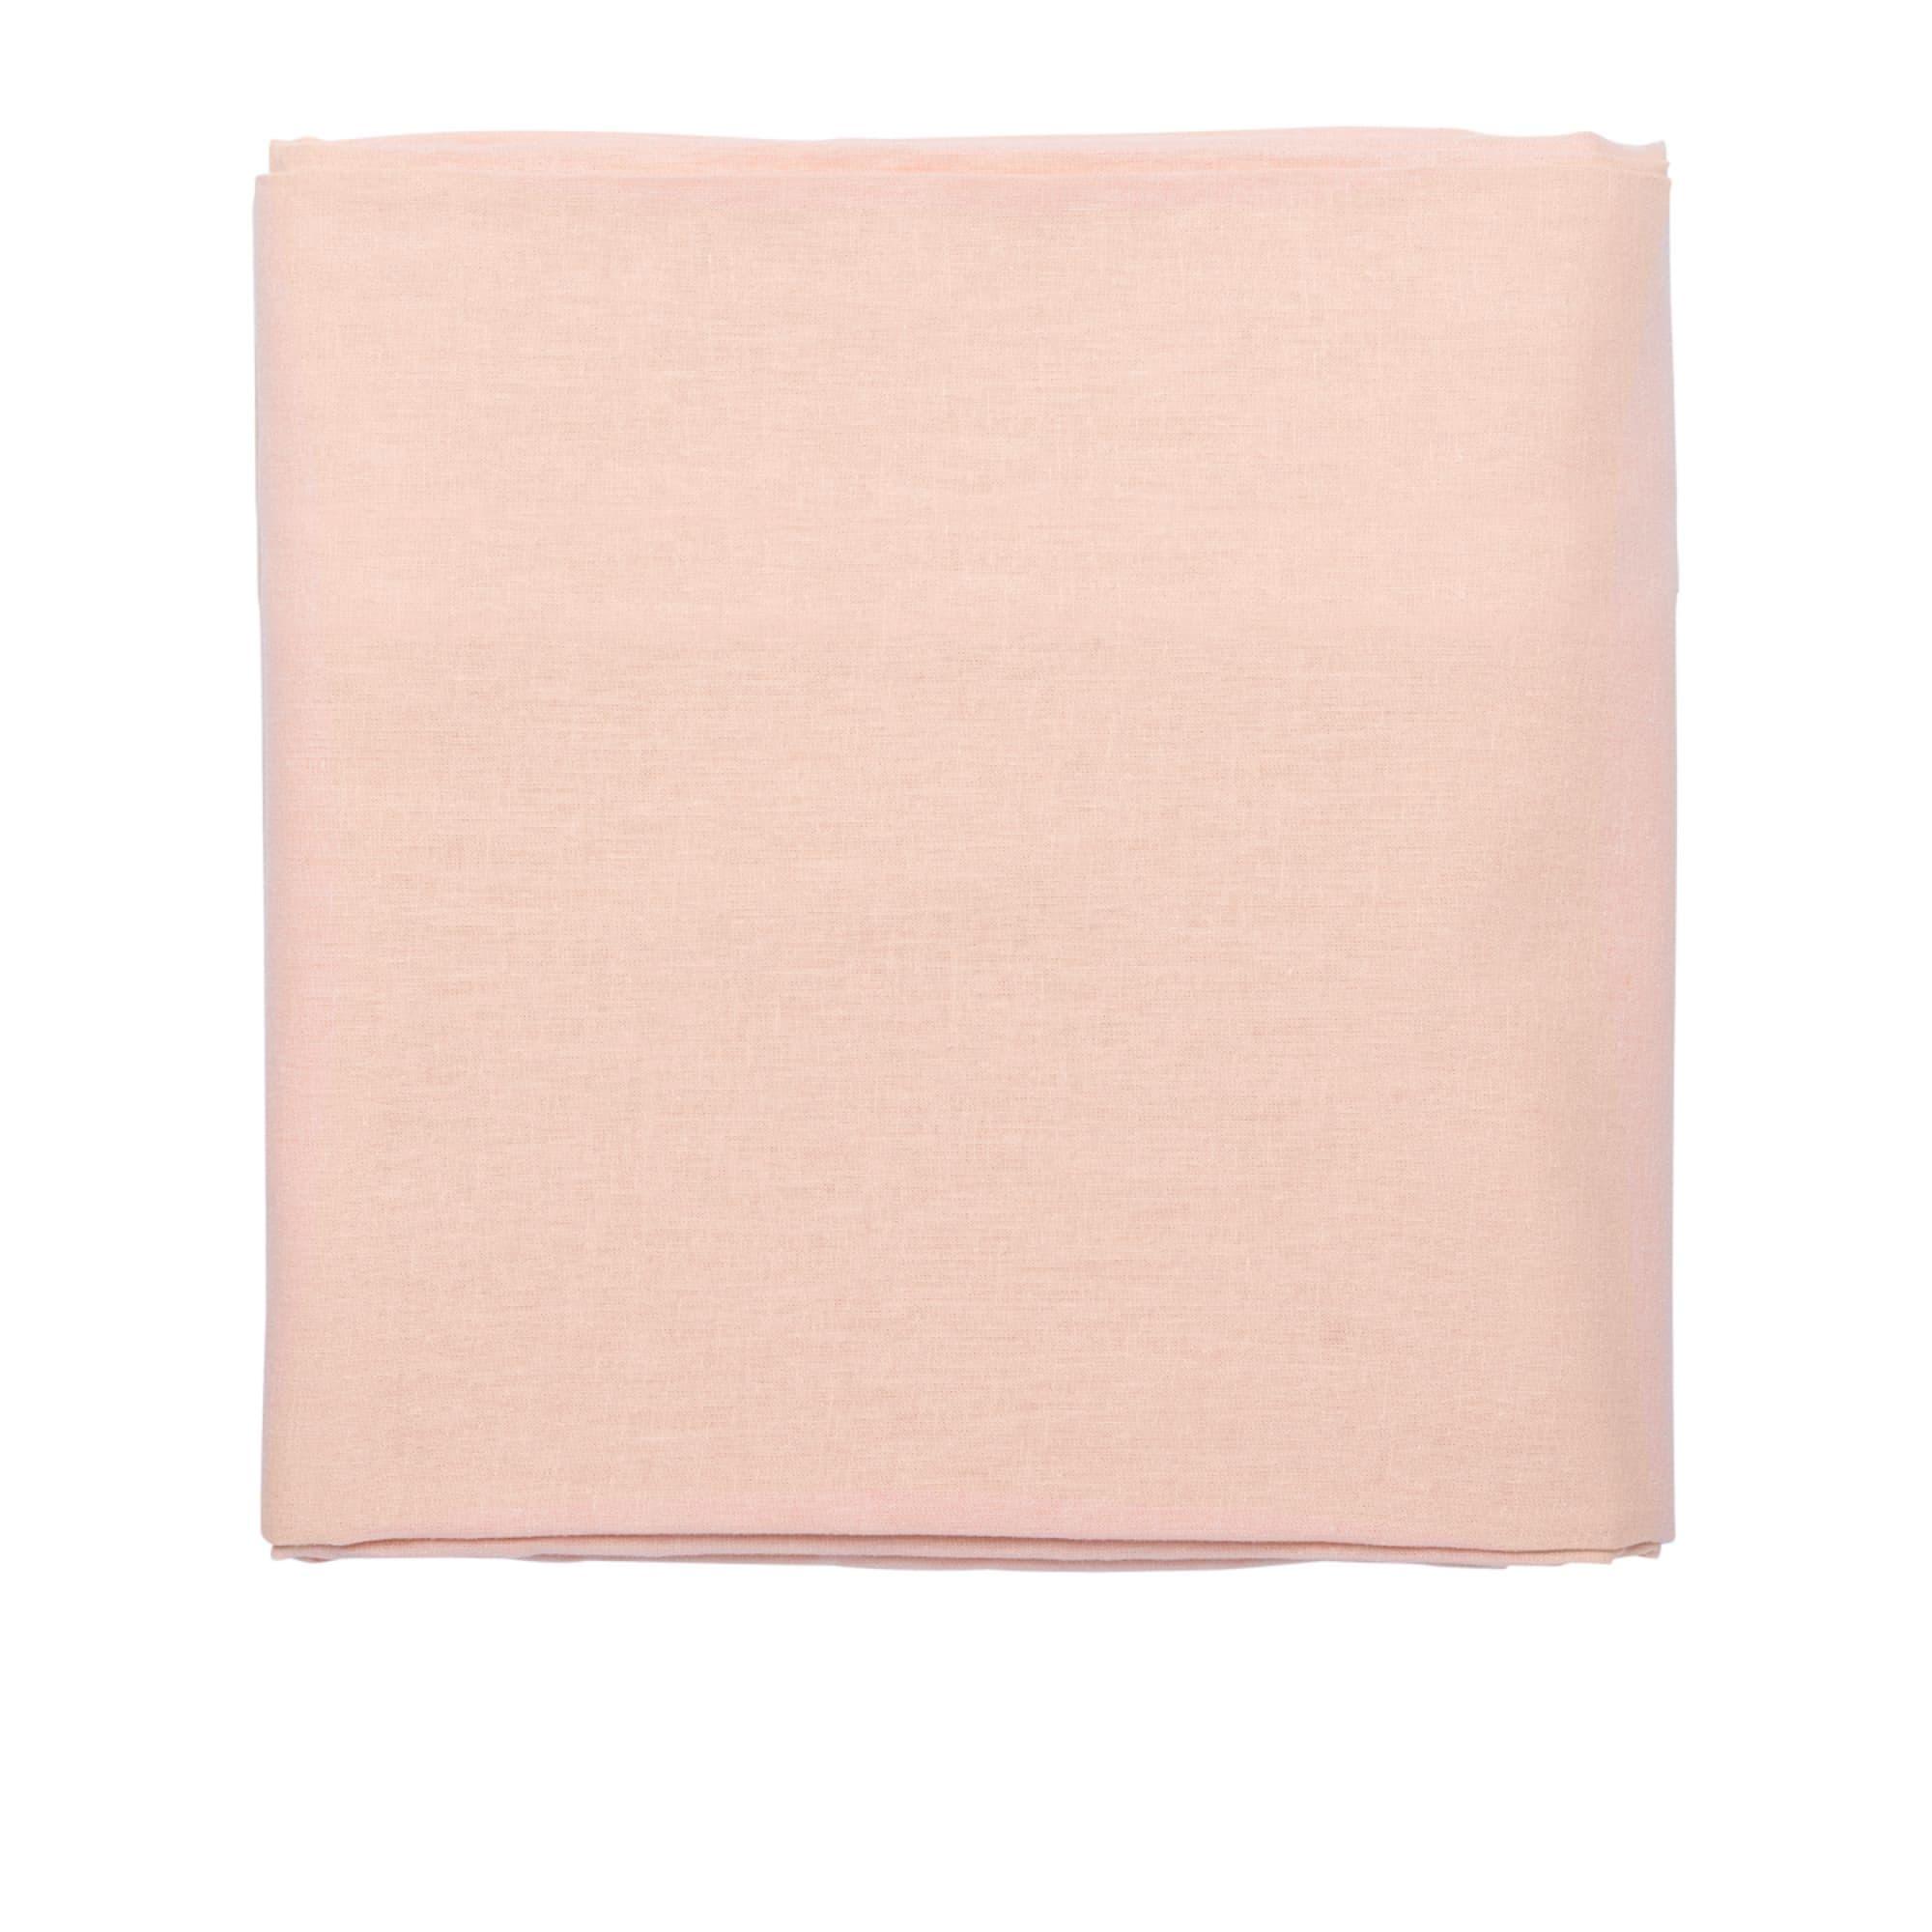 Ecology Dream Fitted Sheet Super King Peach Image 1